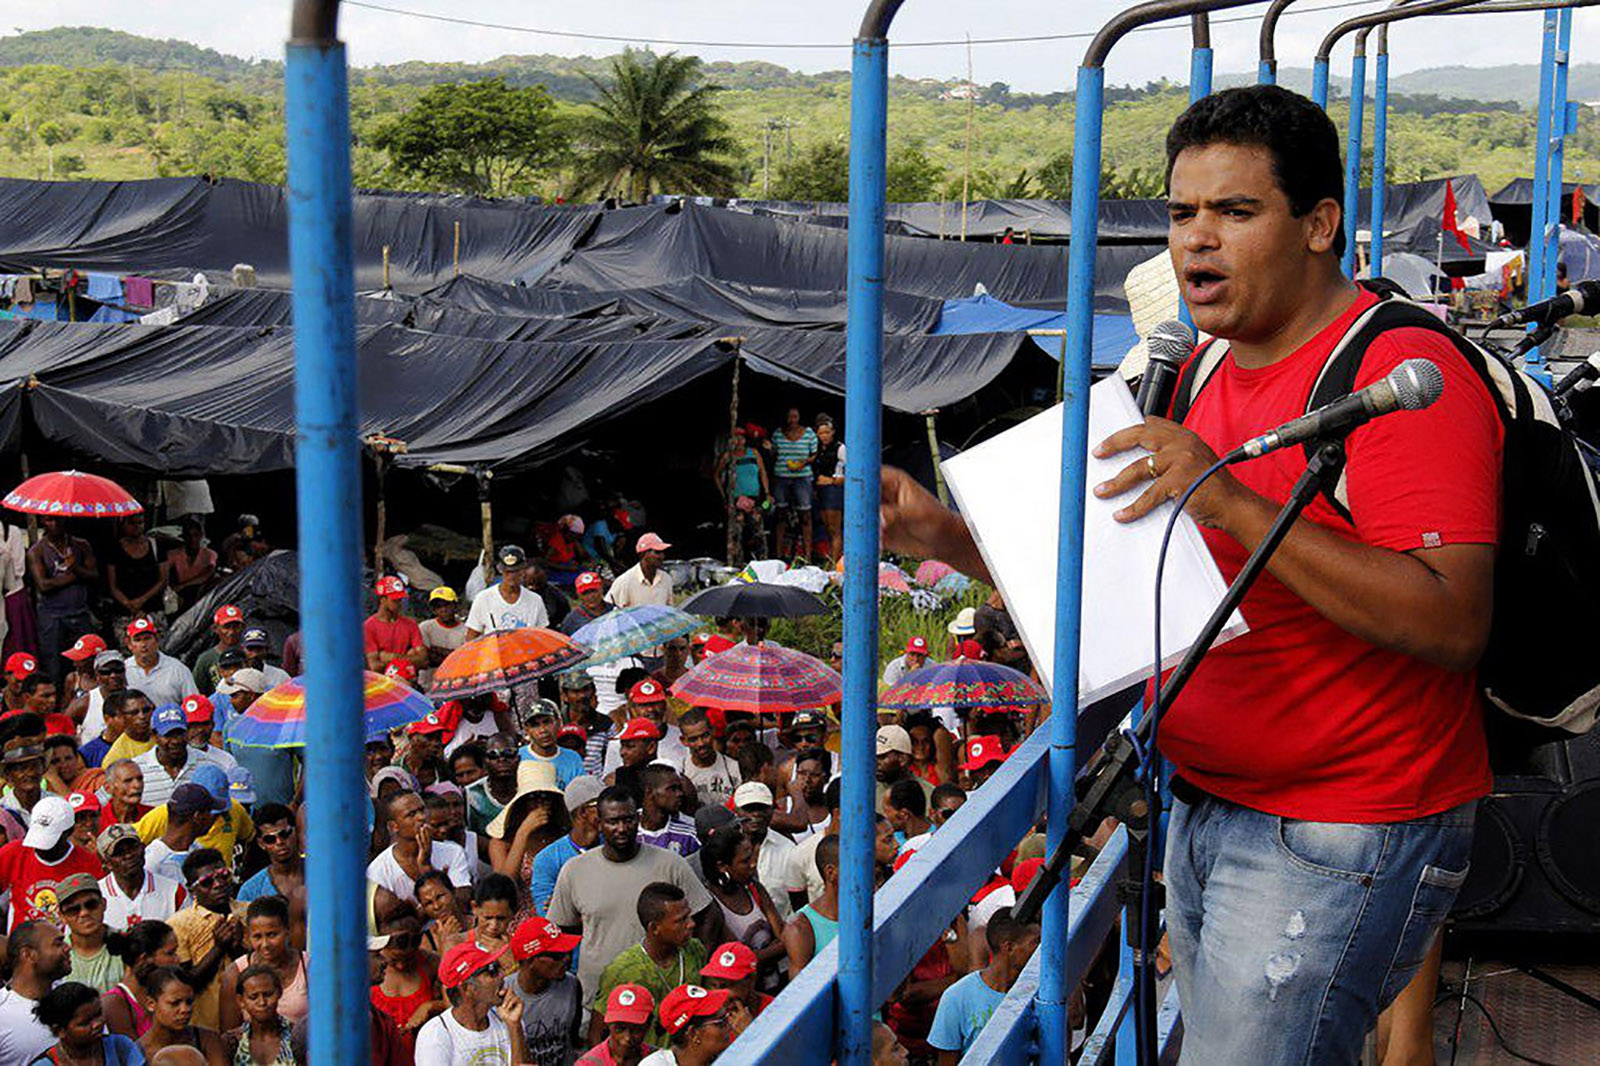 MST activist Márcio Matos addressing a rally at a landless settlement in Bahia state, Brazil